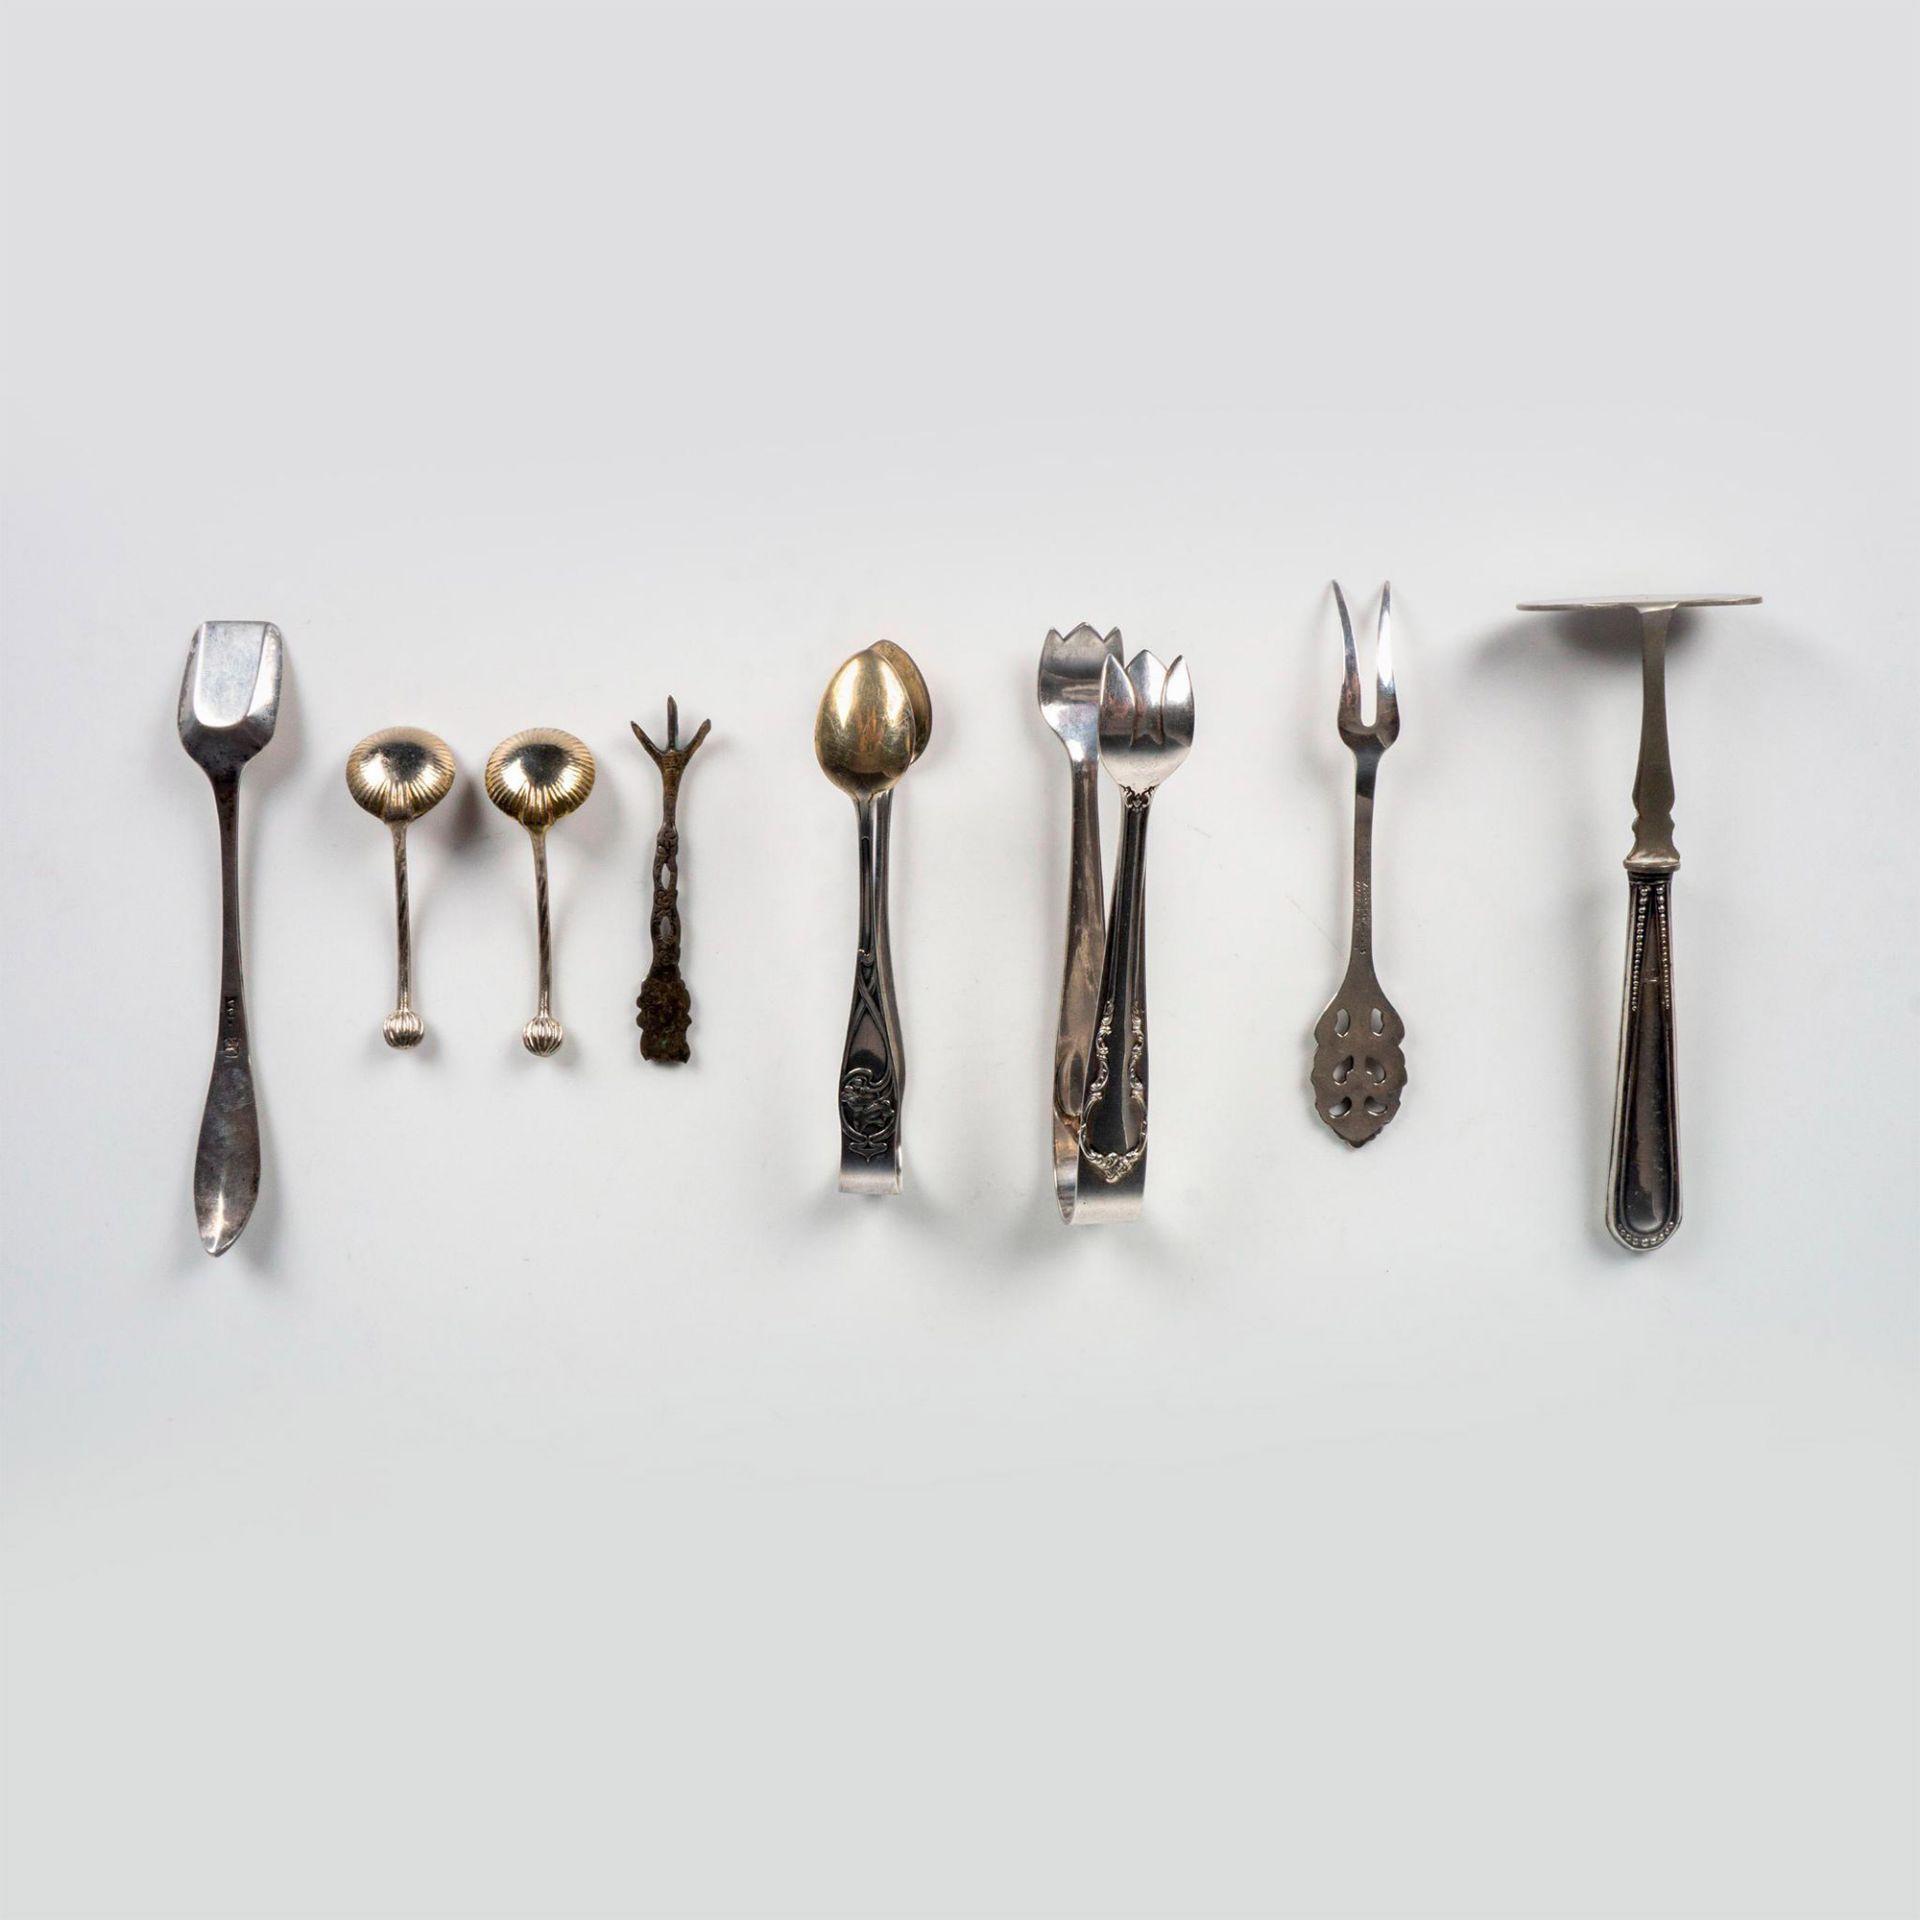 8pc Silverplate Utensils - Image 2 of 2